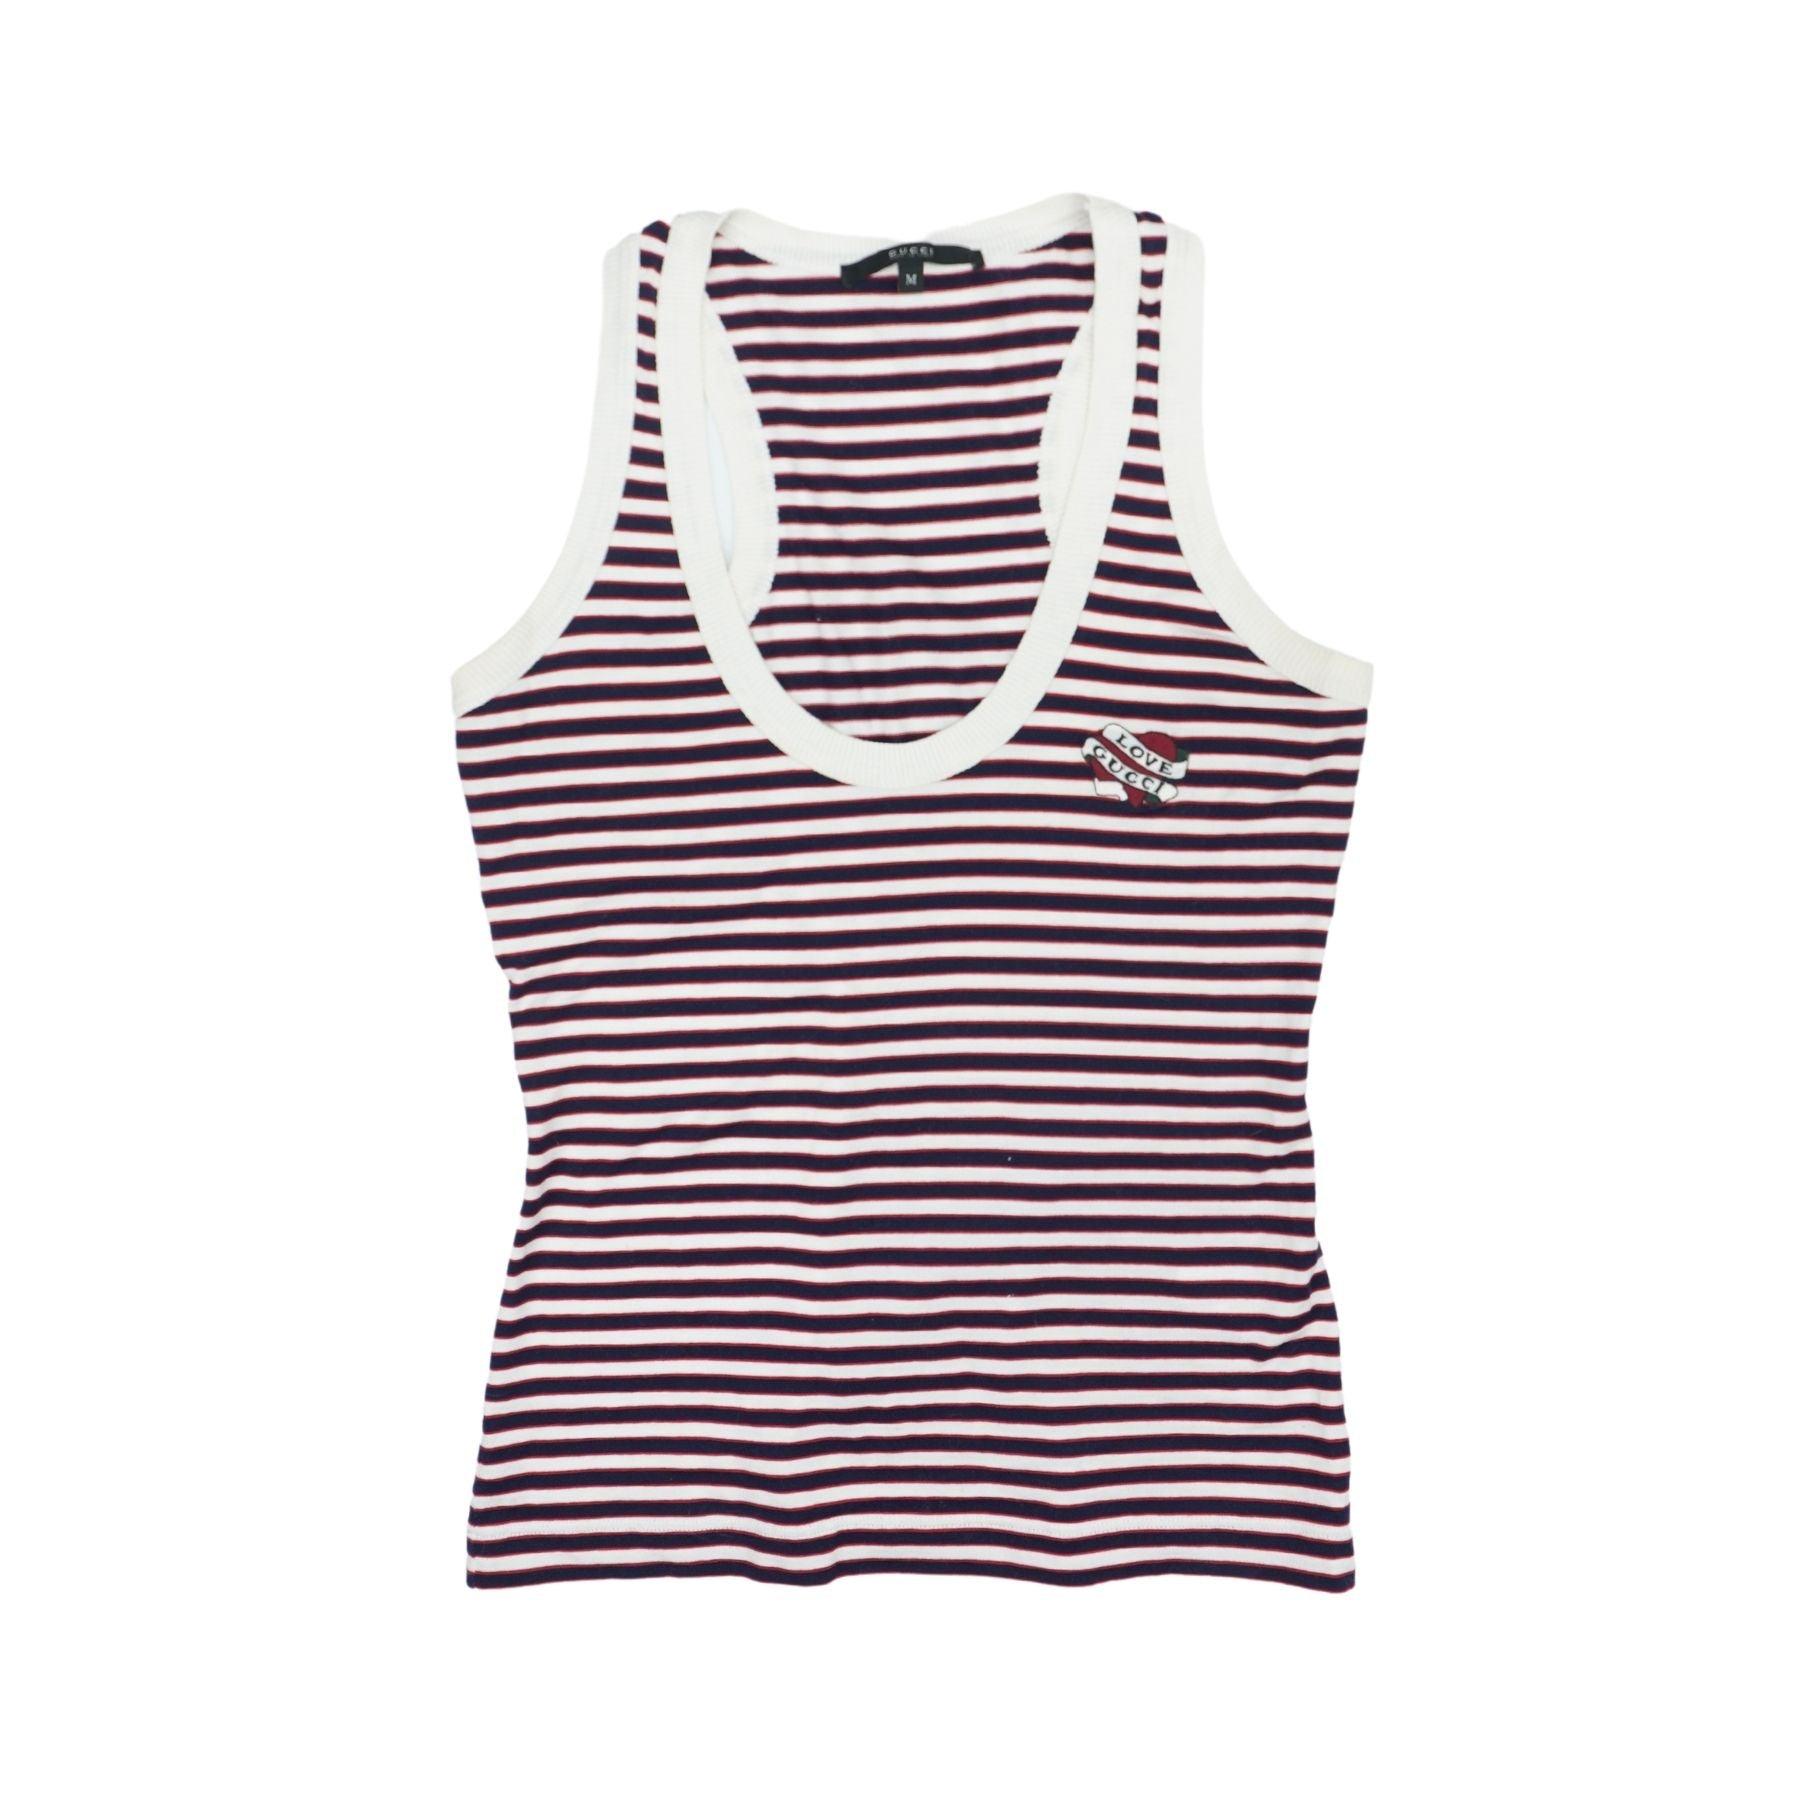 Gucci Tank Top - Women's M - Fashionably Yours